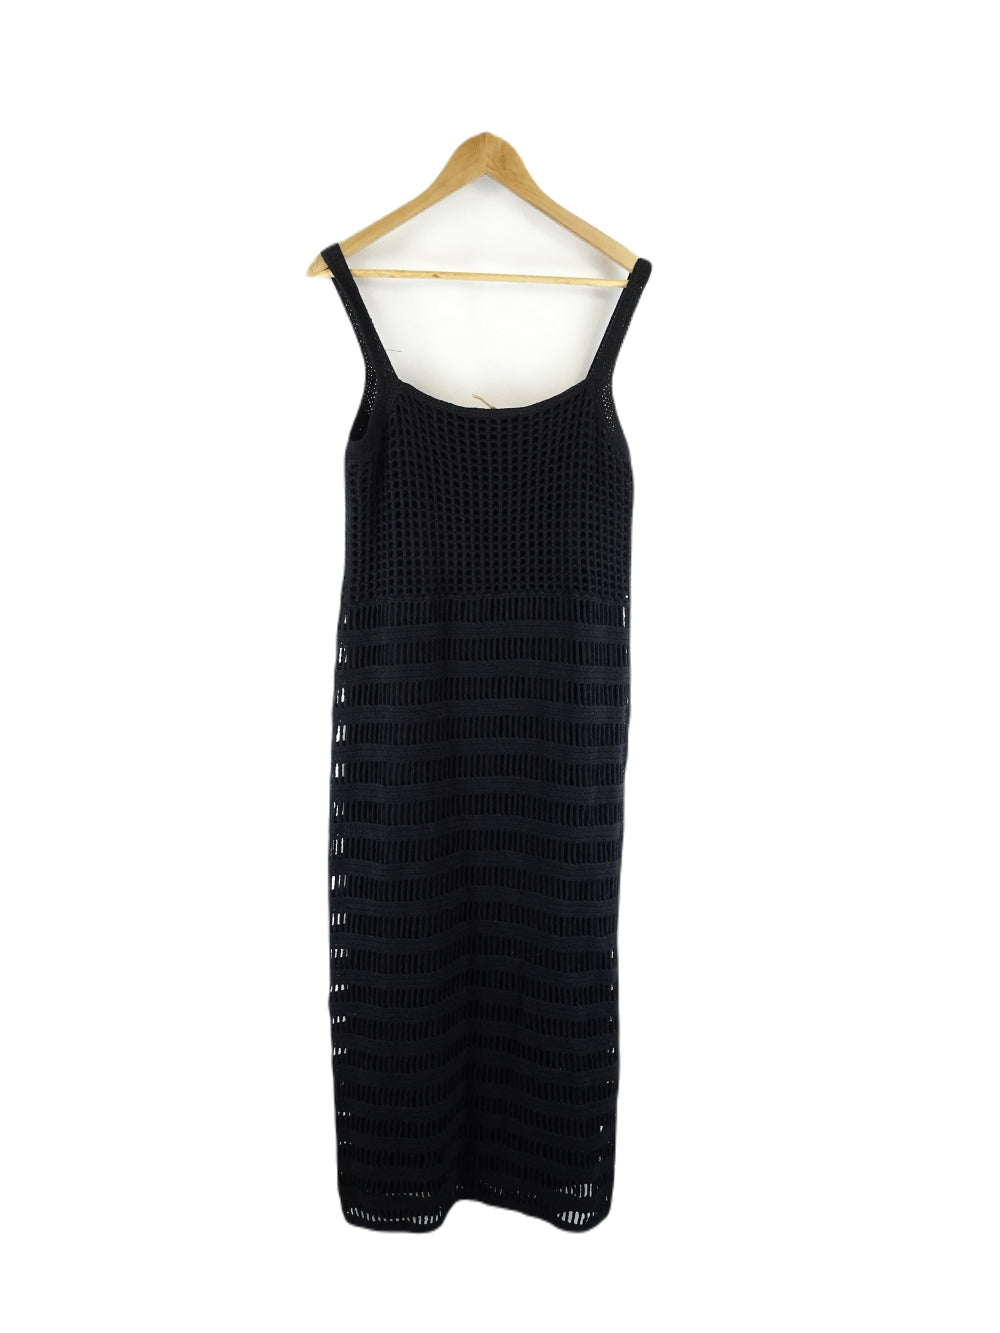 Country Road Black Knit Dress M